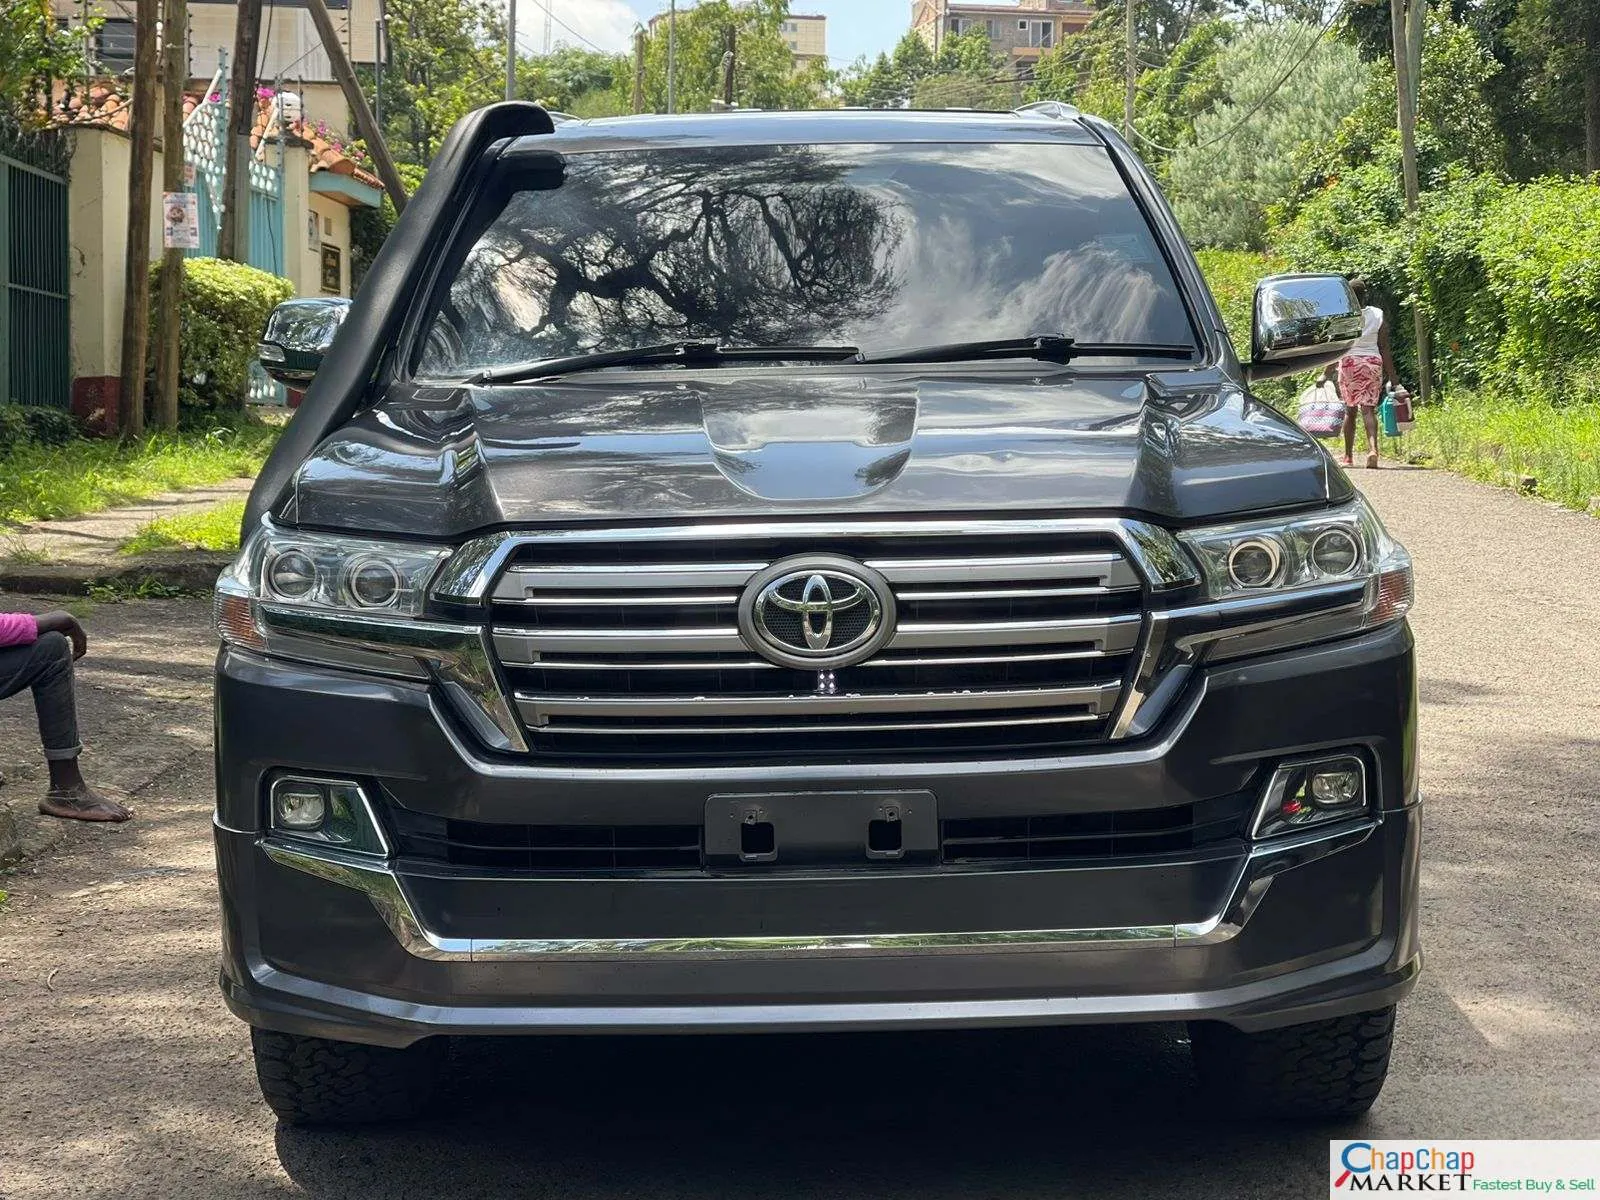 Toyota Land Cruiser VX V8 DIESEL QUICK SALE Trade in Ok EXCLUSIVE HIRE PURCHASE INSTALLMENTS